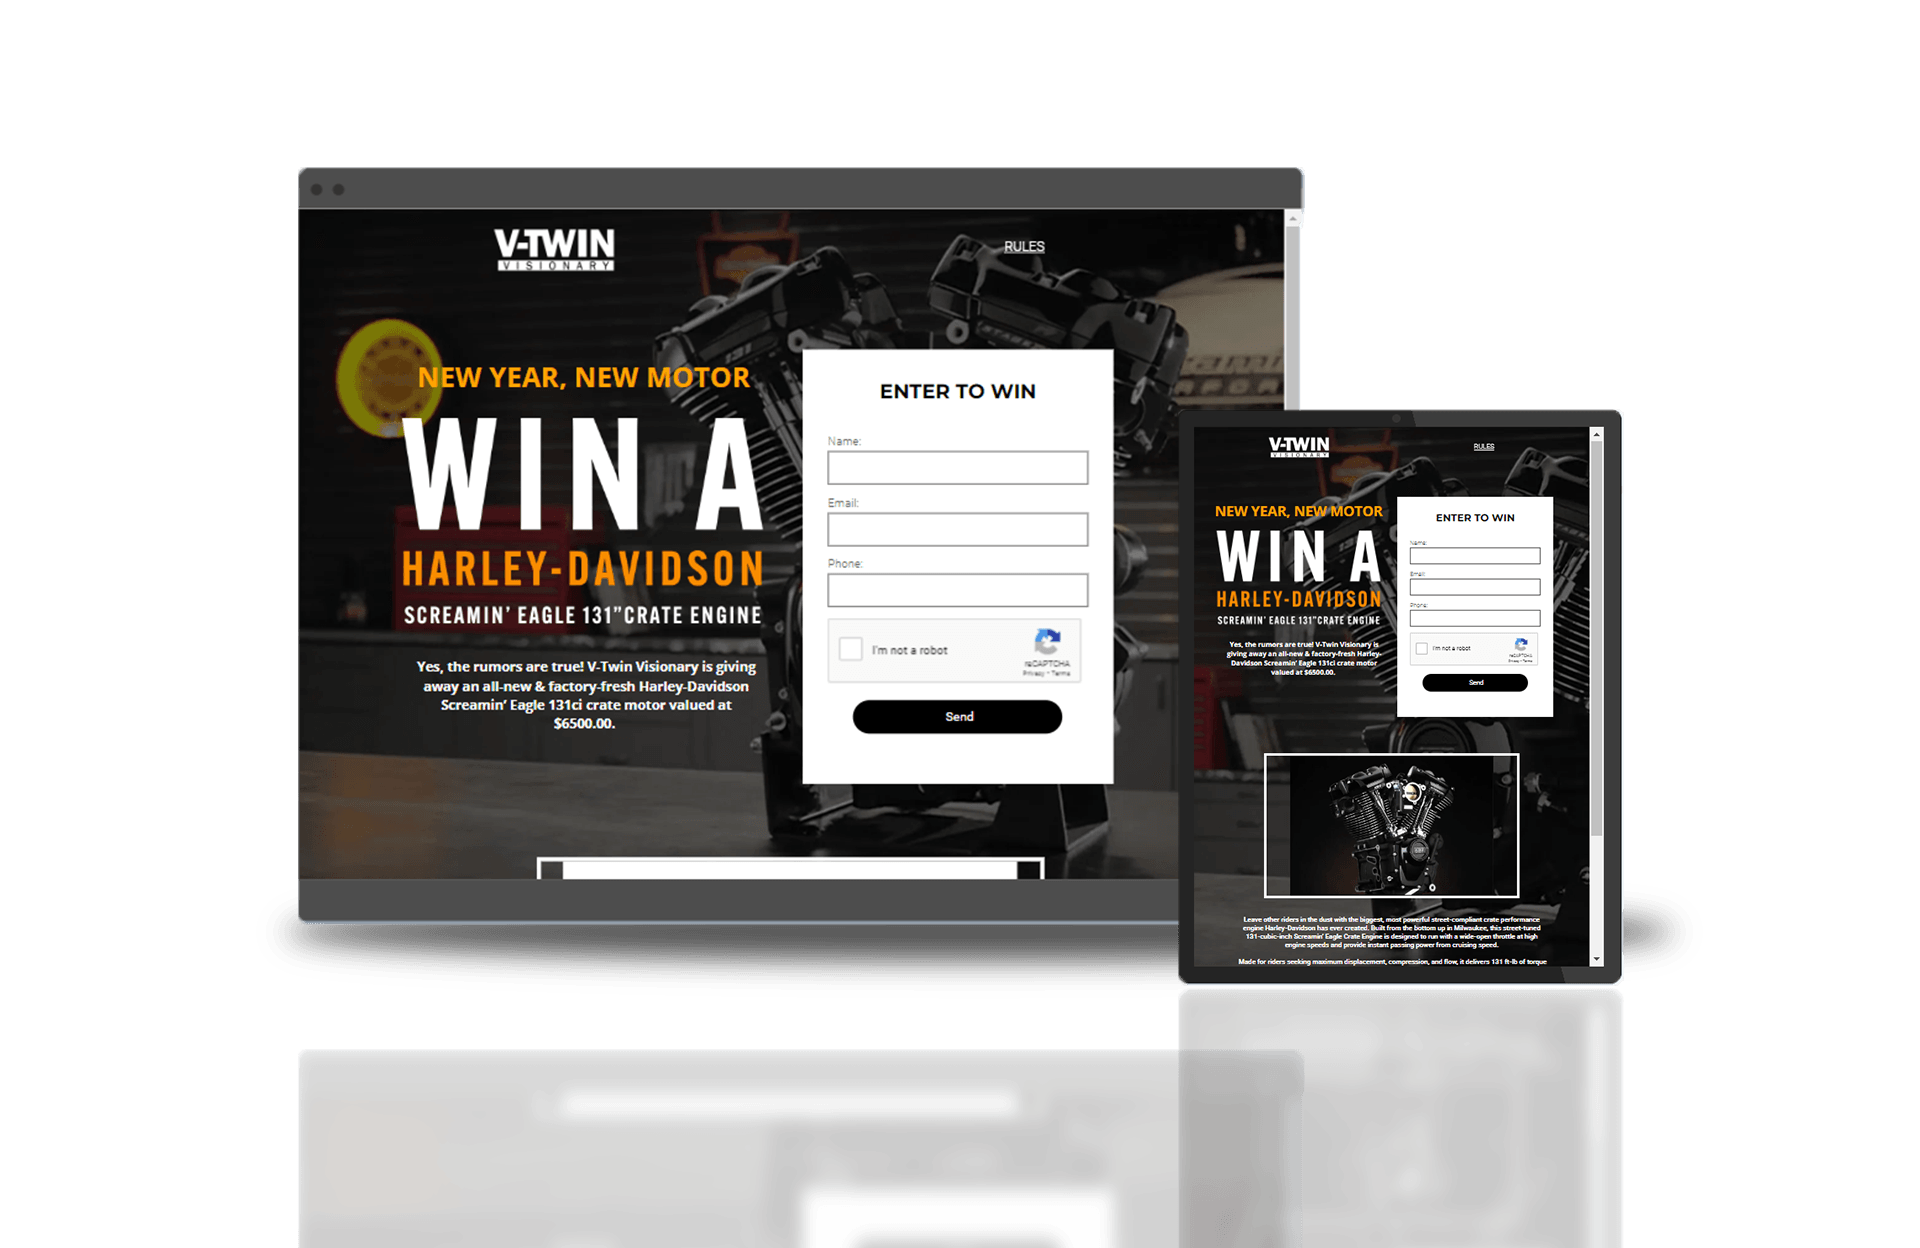 example of landing page for a motorcycle dealer promoting a contest that our online ads drove clicks to